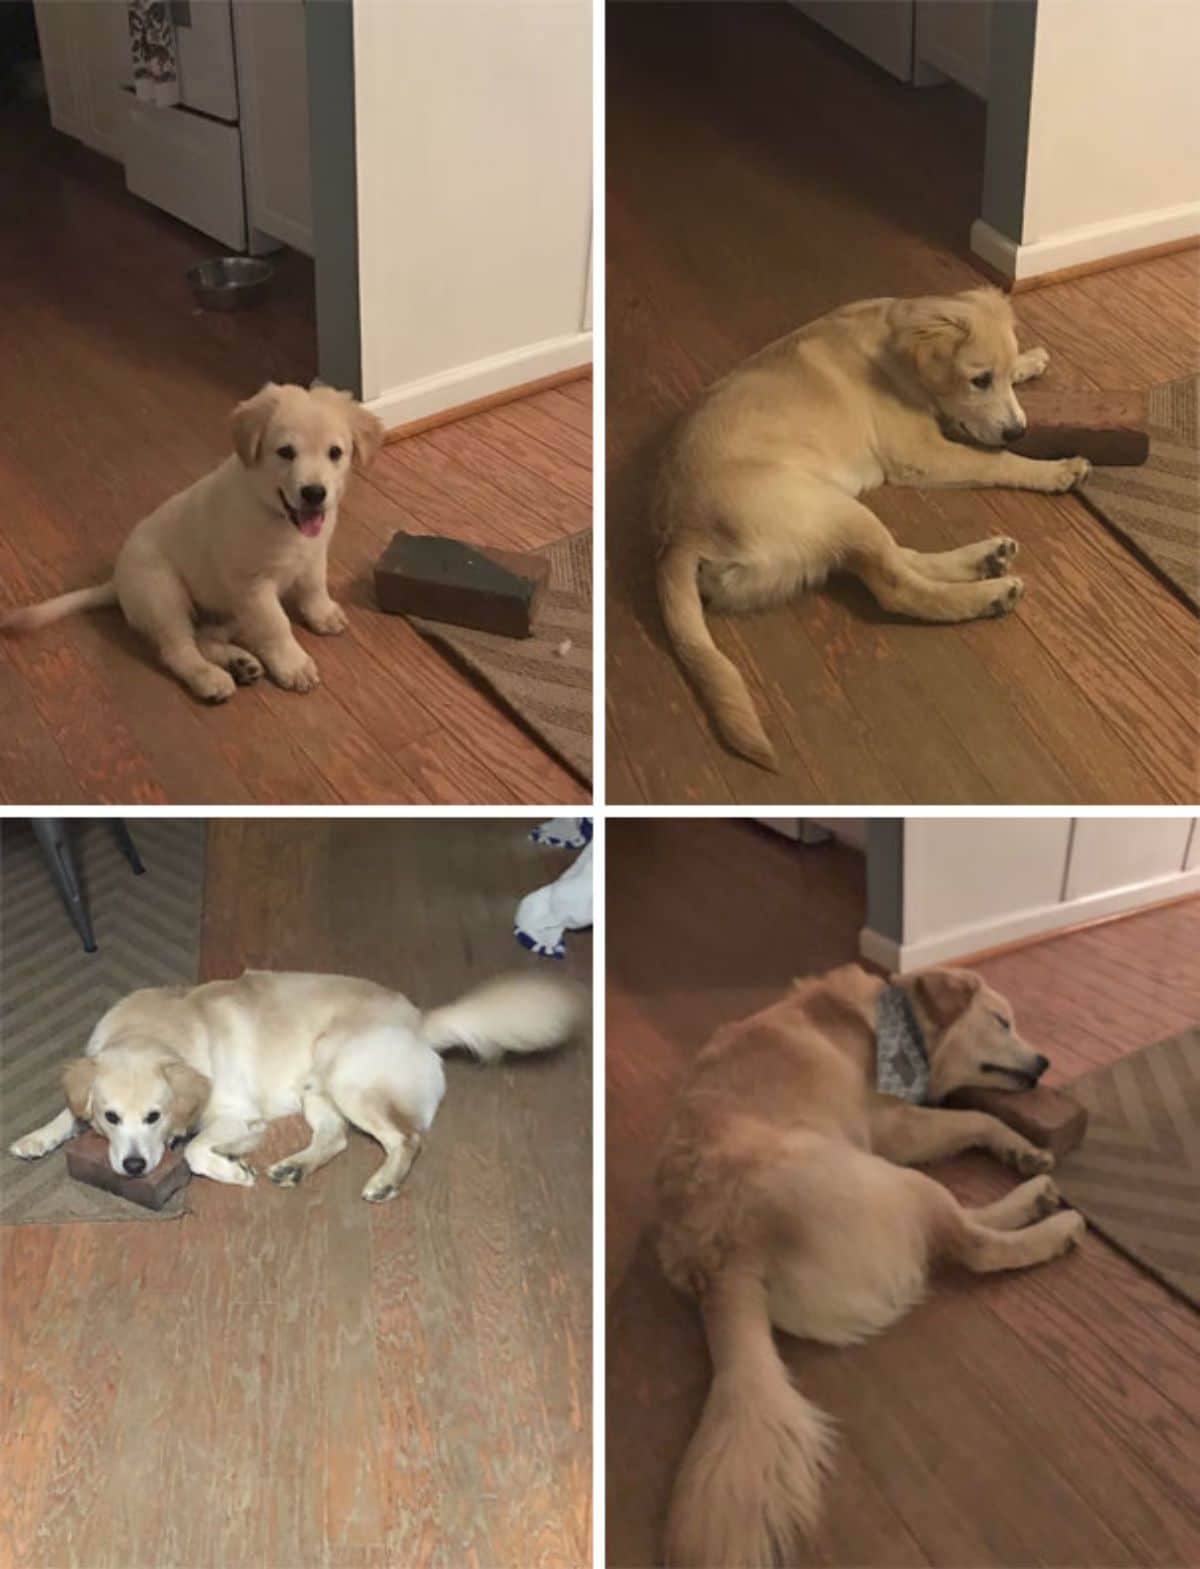 3 photos of a golden retriever puppy with a red brick and 1 photo of an adult golden retriever with a red brick